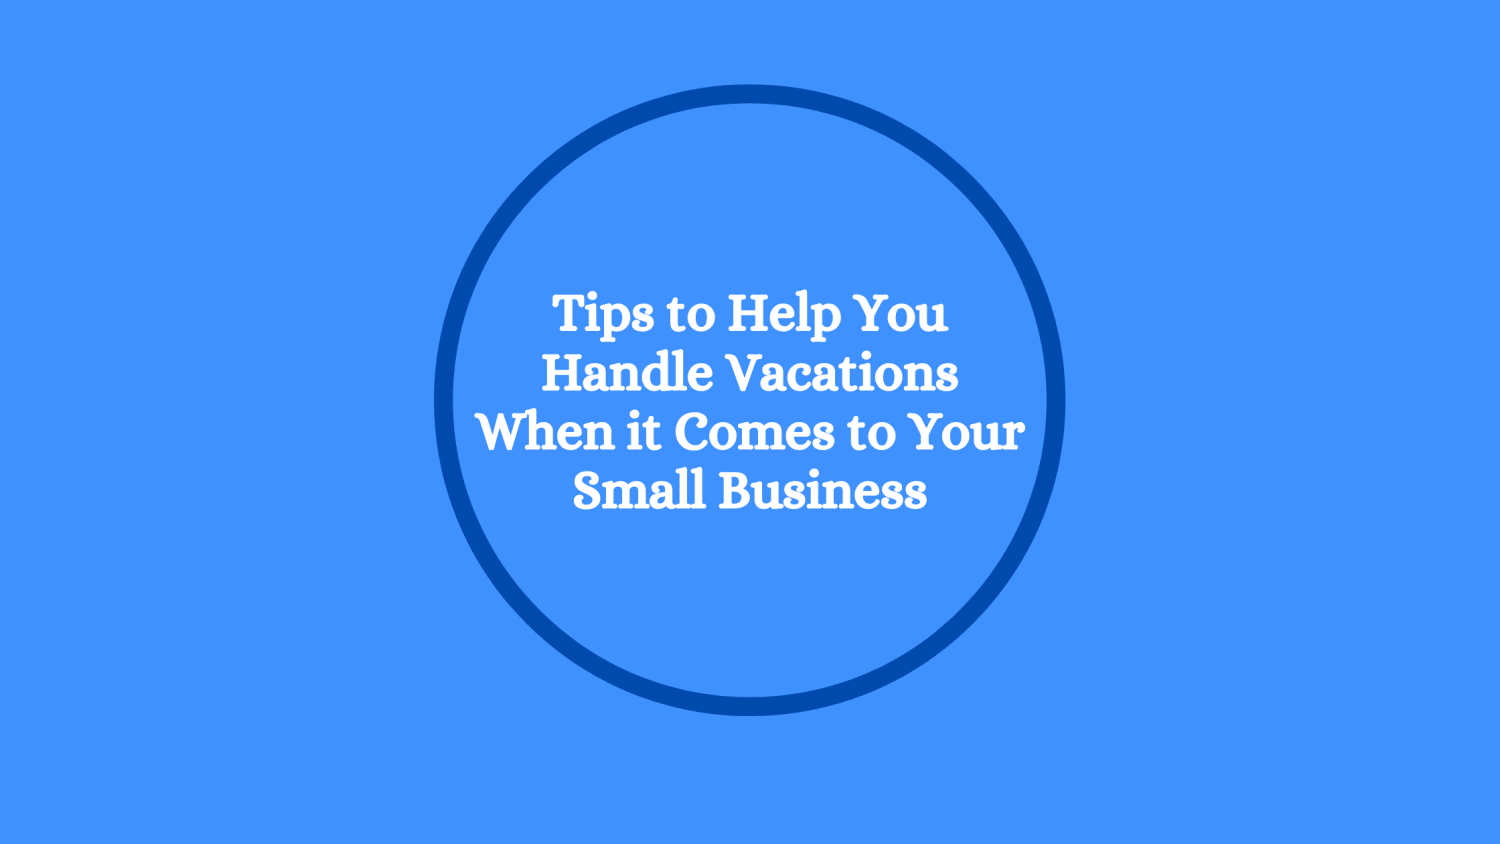 Tips to Help You Handle Vacations When it Comes to Your Small Business